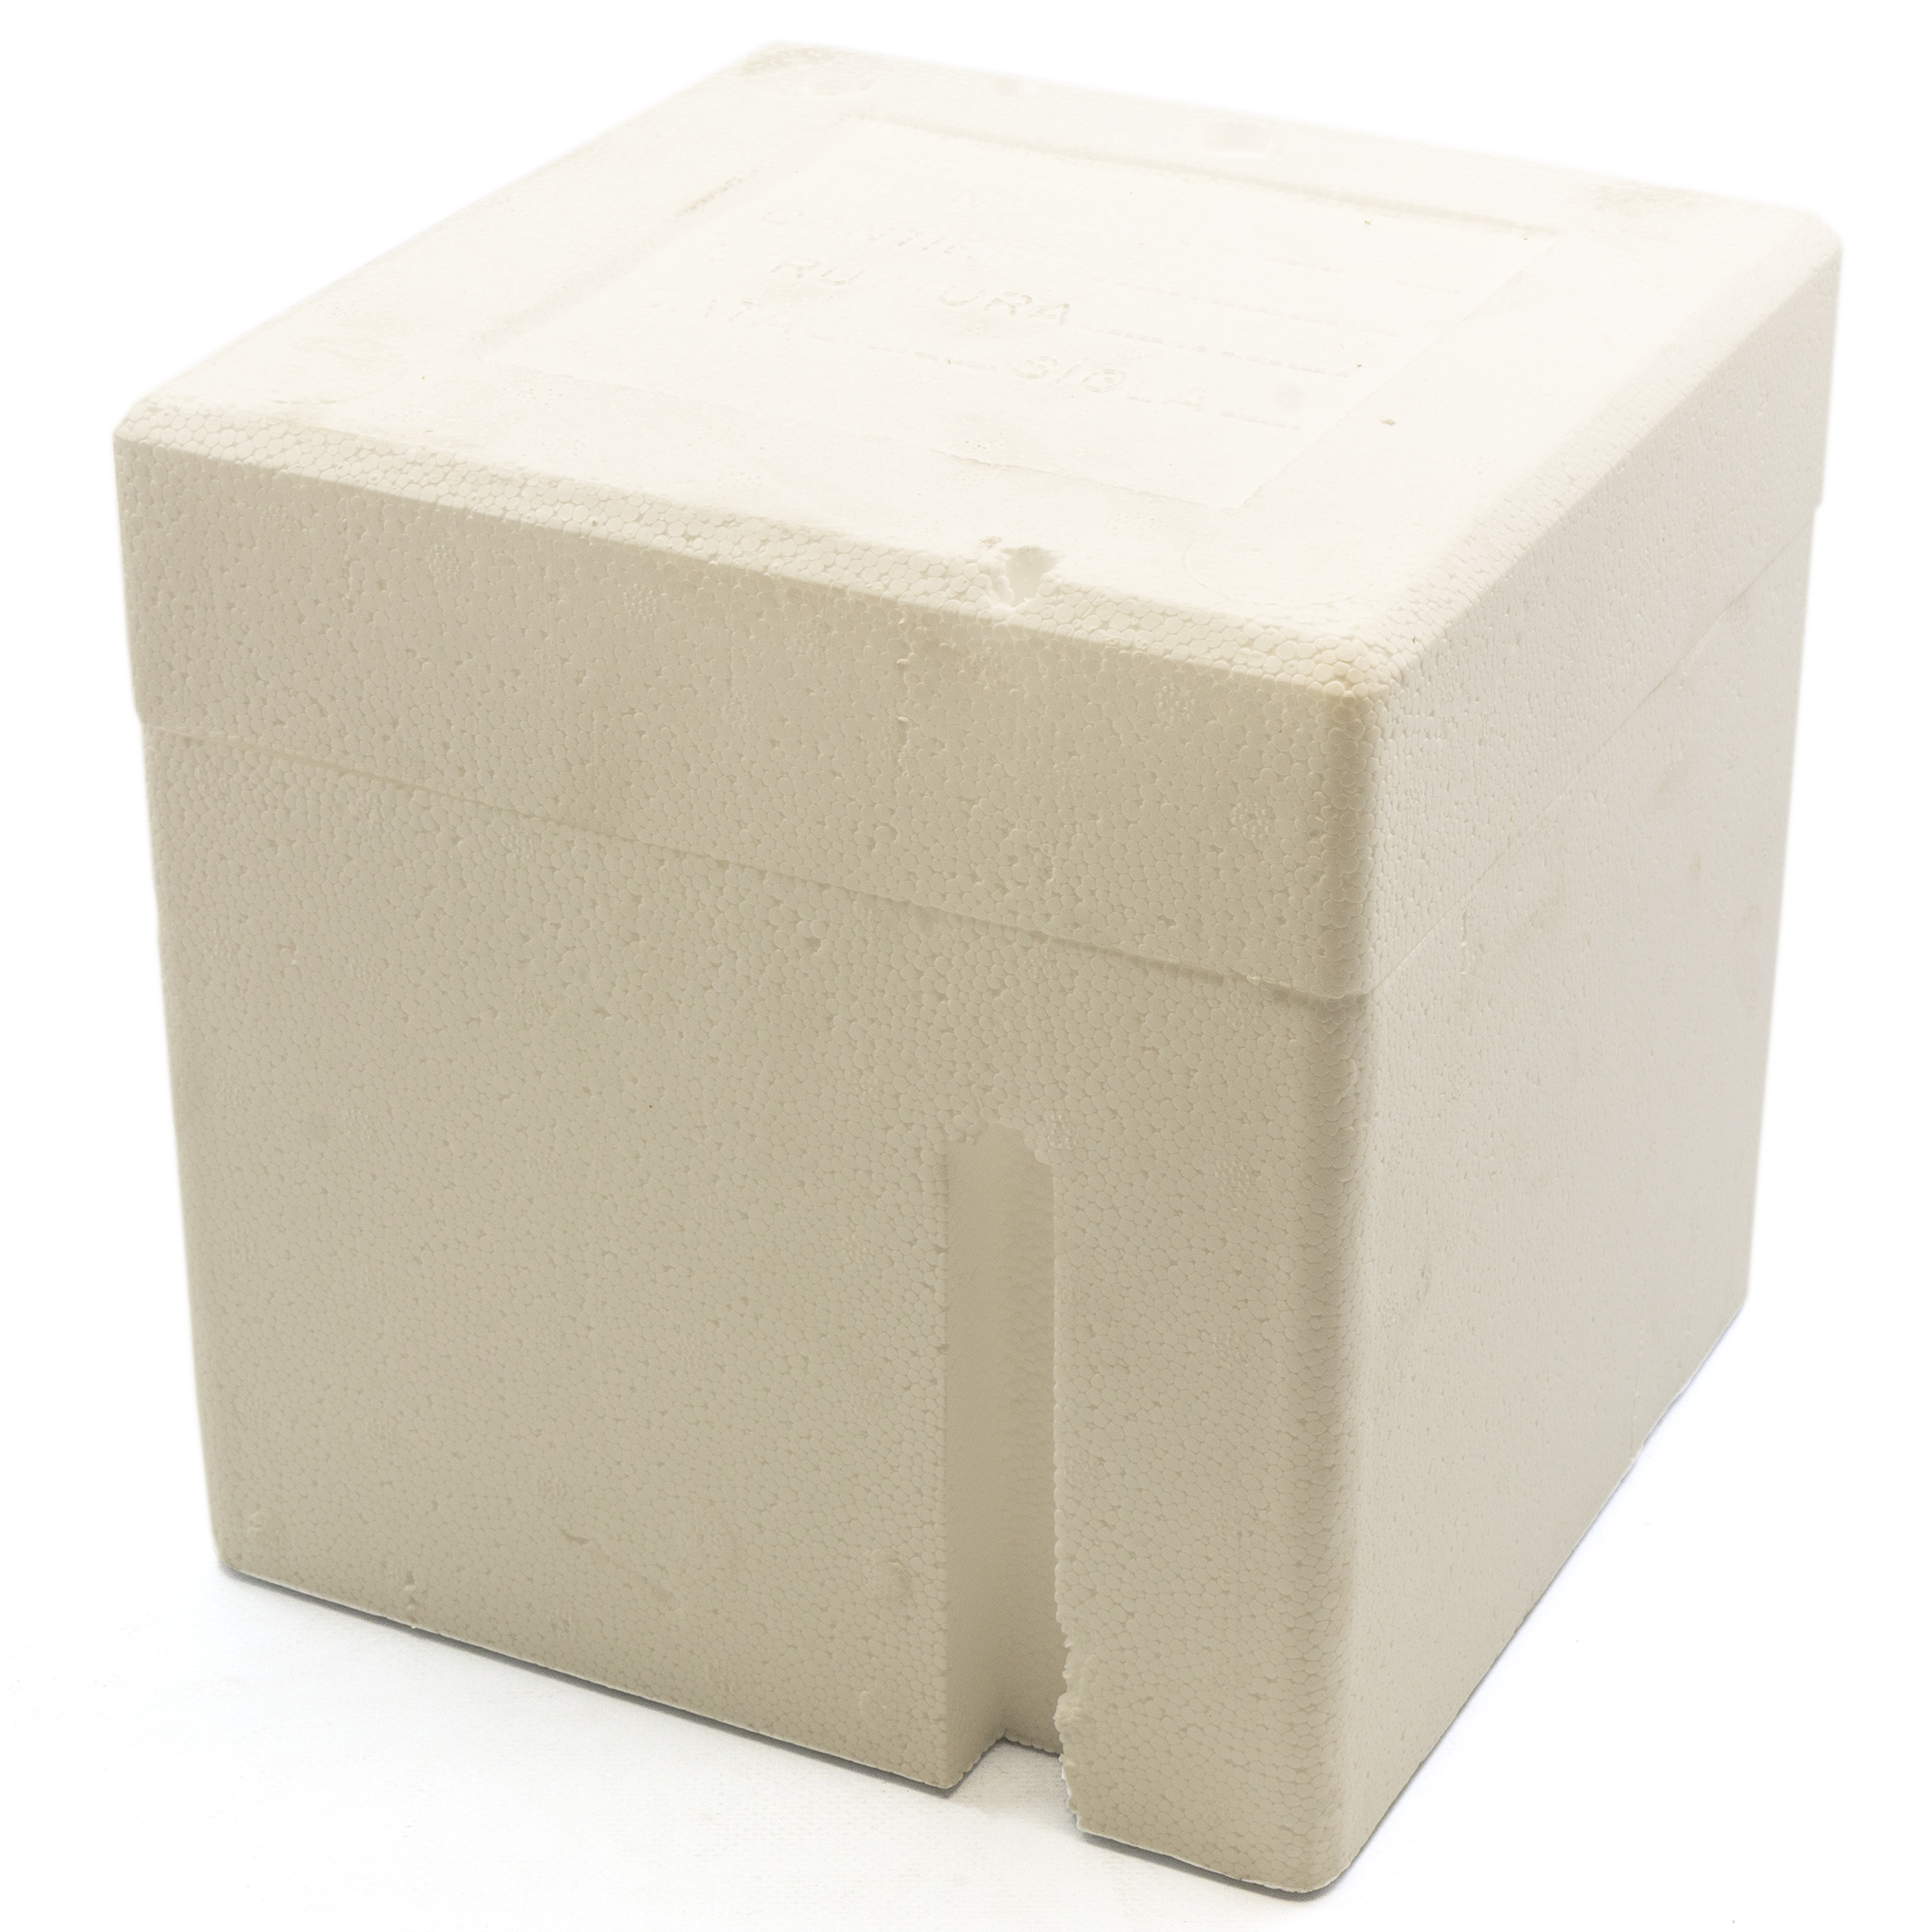 CONT 54-C2010/A1 Spare polystyrene cube mould 150x150x150mm for adiabatic calorimeter